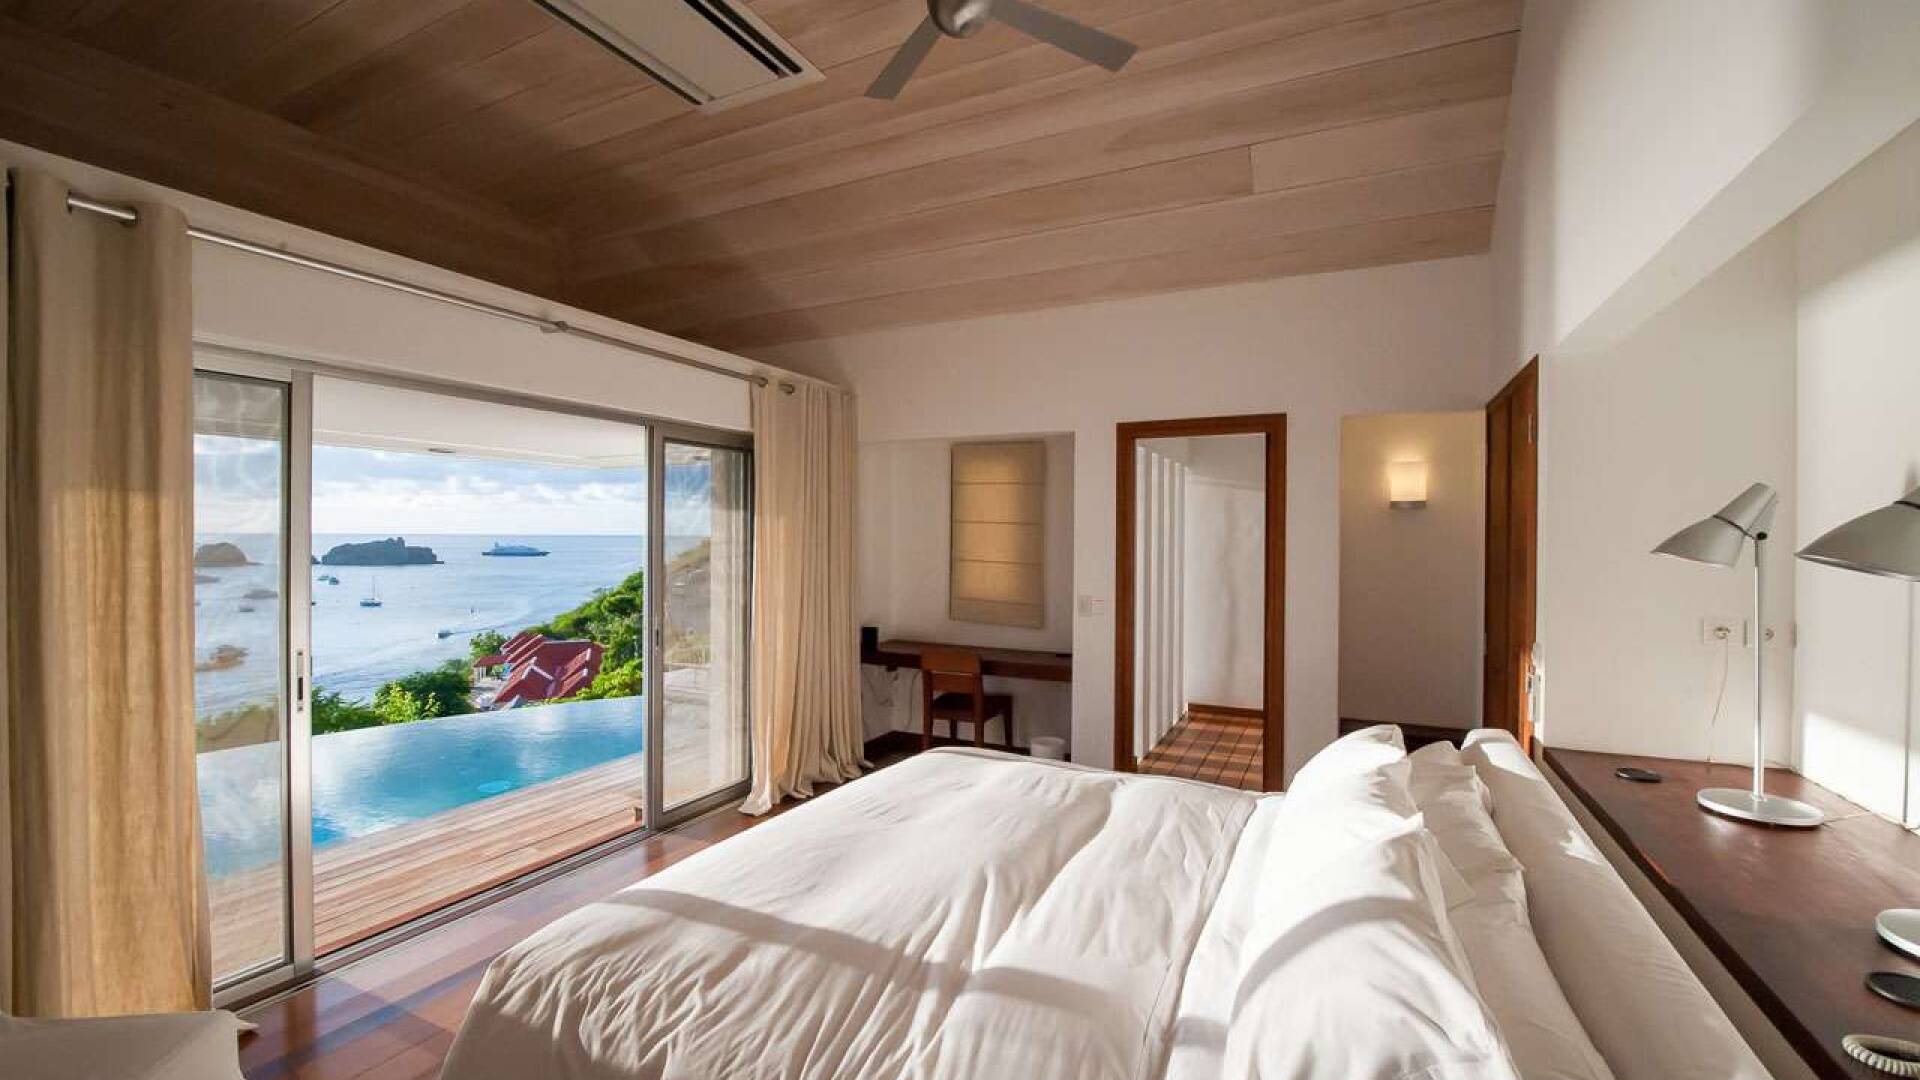 Bedroom at WV LAM, Gustavia, St. Barthelemy